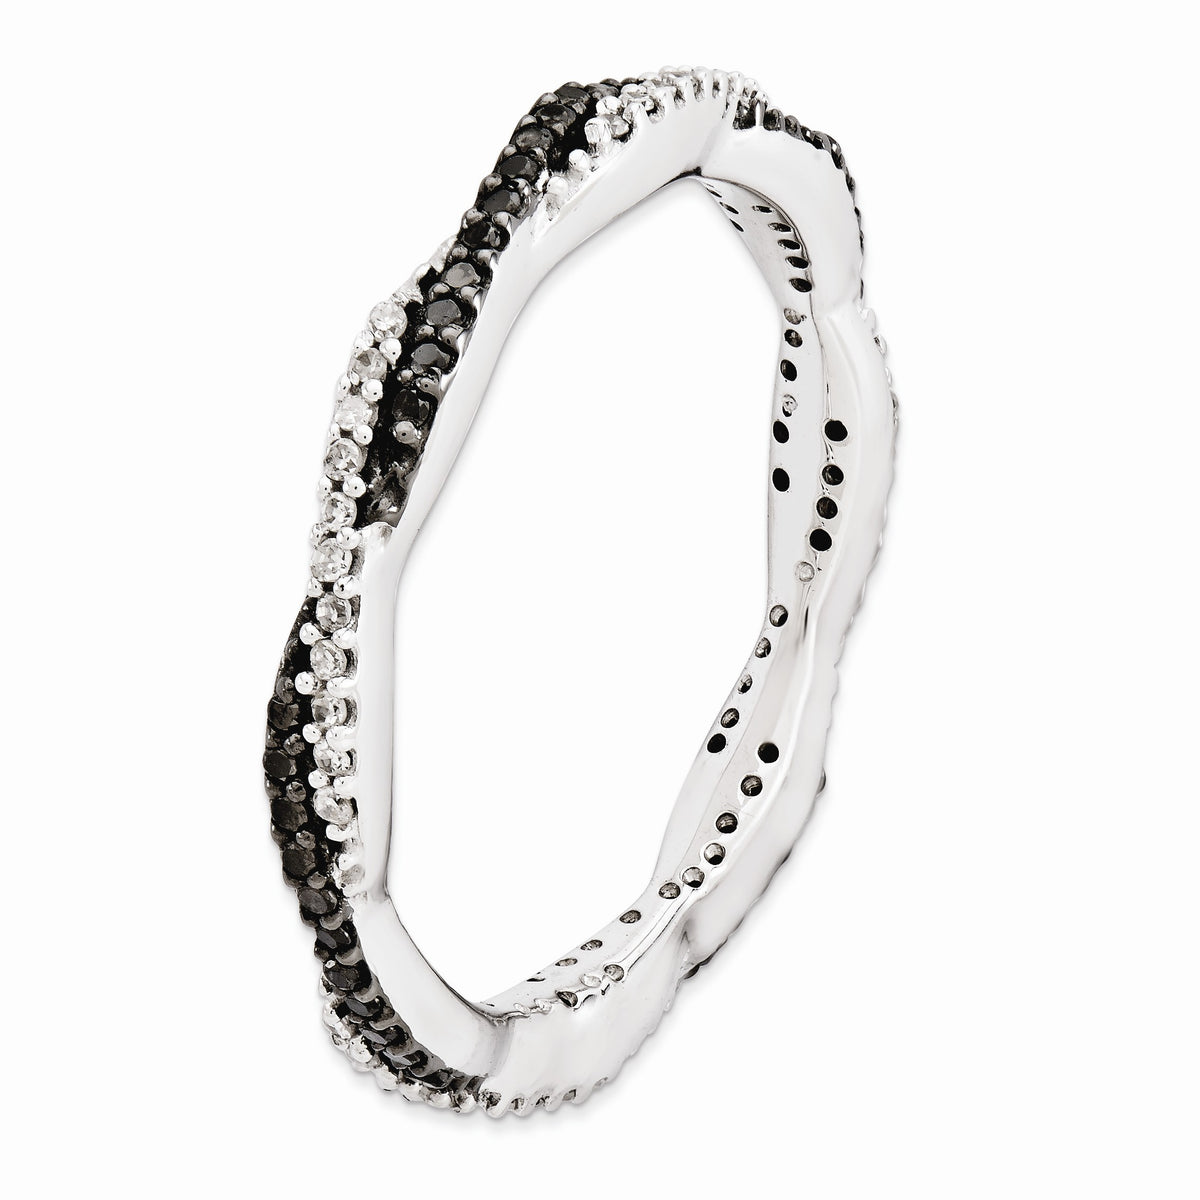 Alternate view of the Stackable Two-tone 1/4 Ctw HI/I3 Diamond Rhodium Plated Silver Band by The Black Bow Jewelry Co.